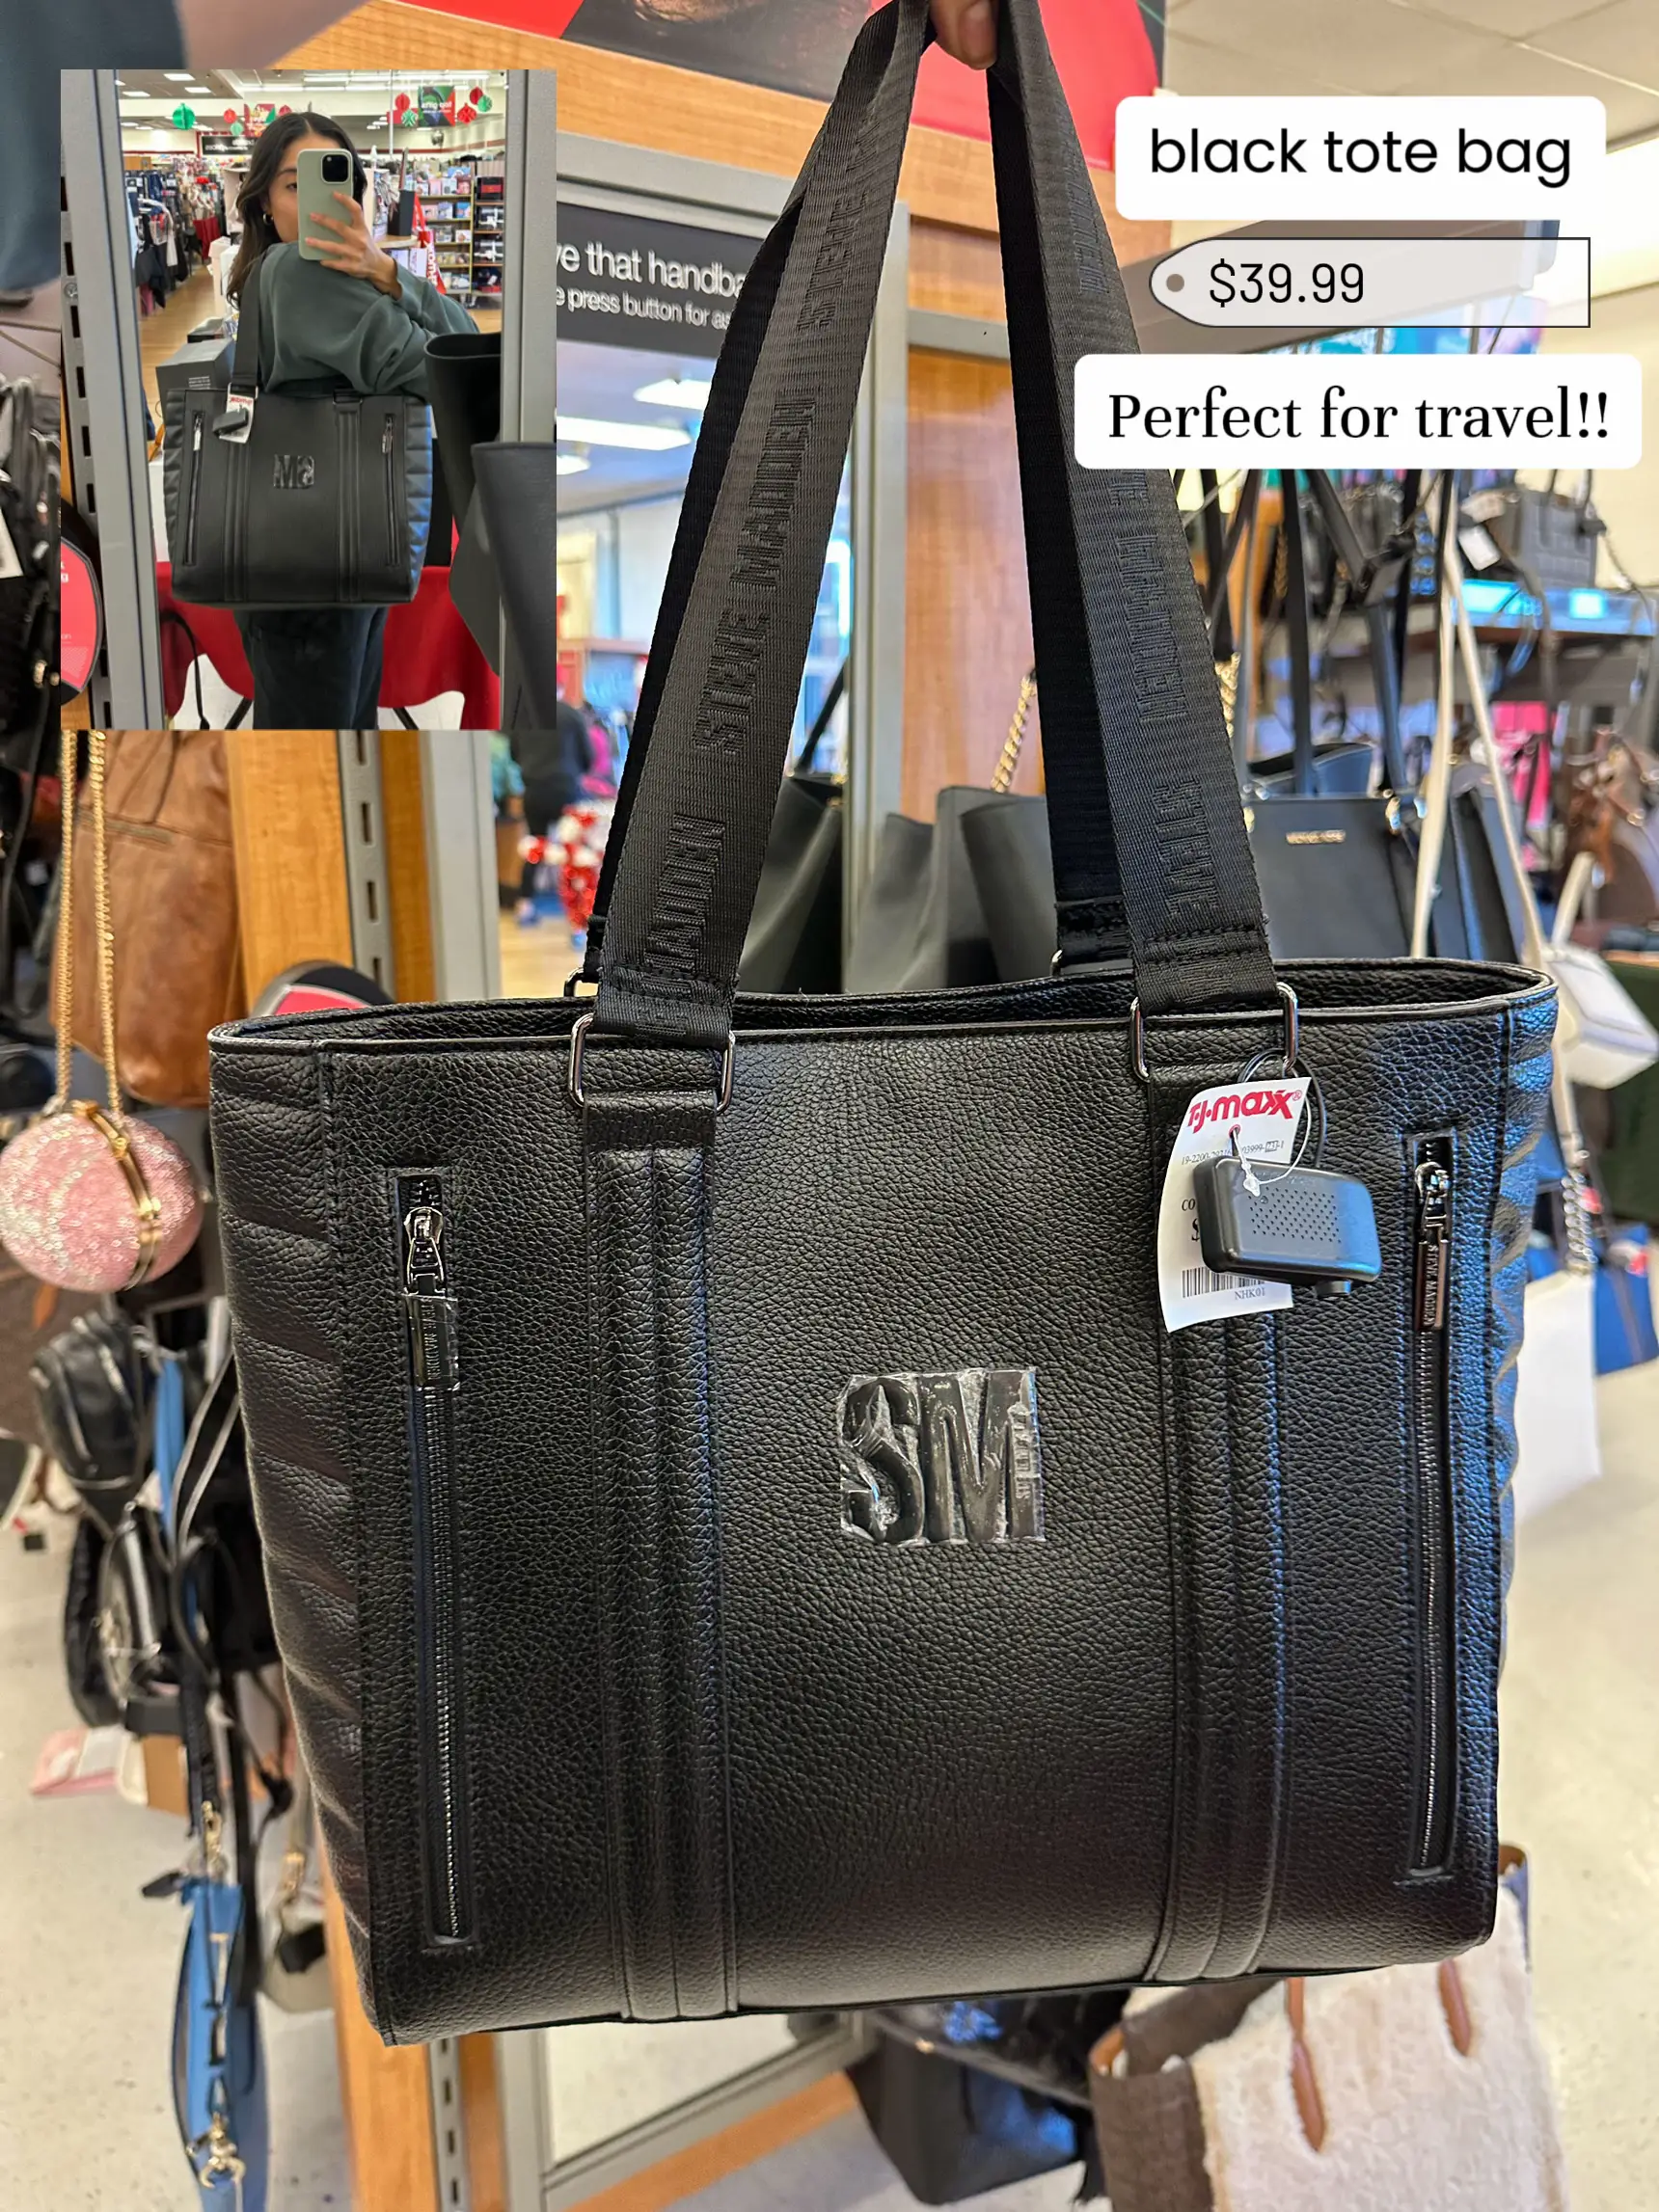  A black tote bag with a silver logo that says fij-maxx.